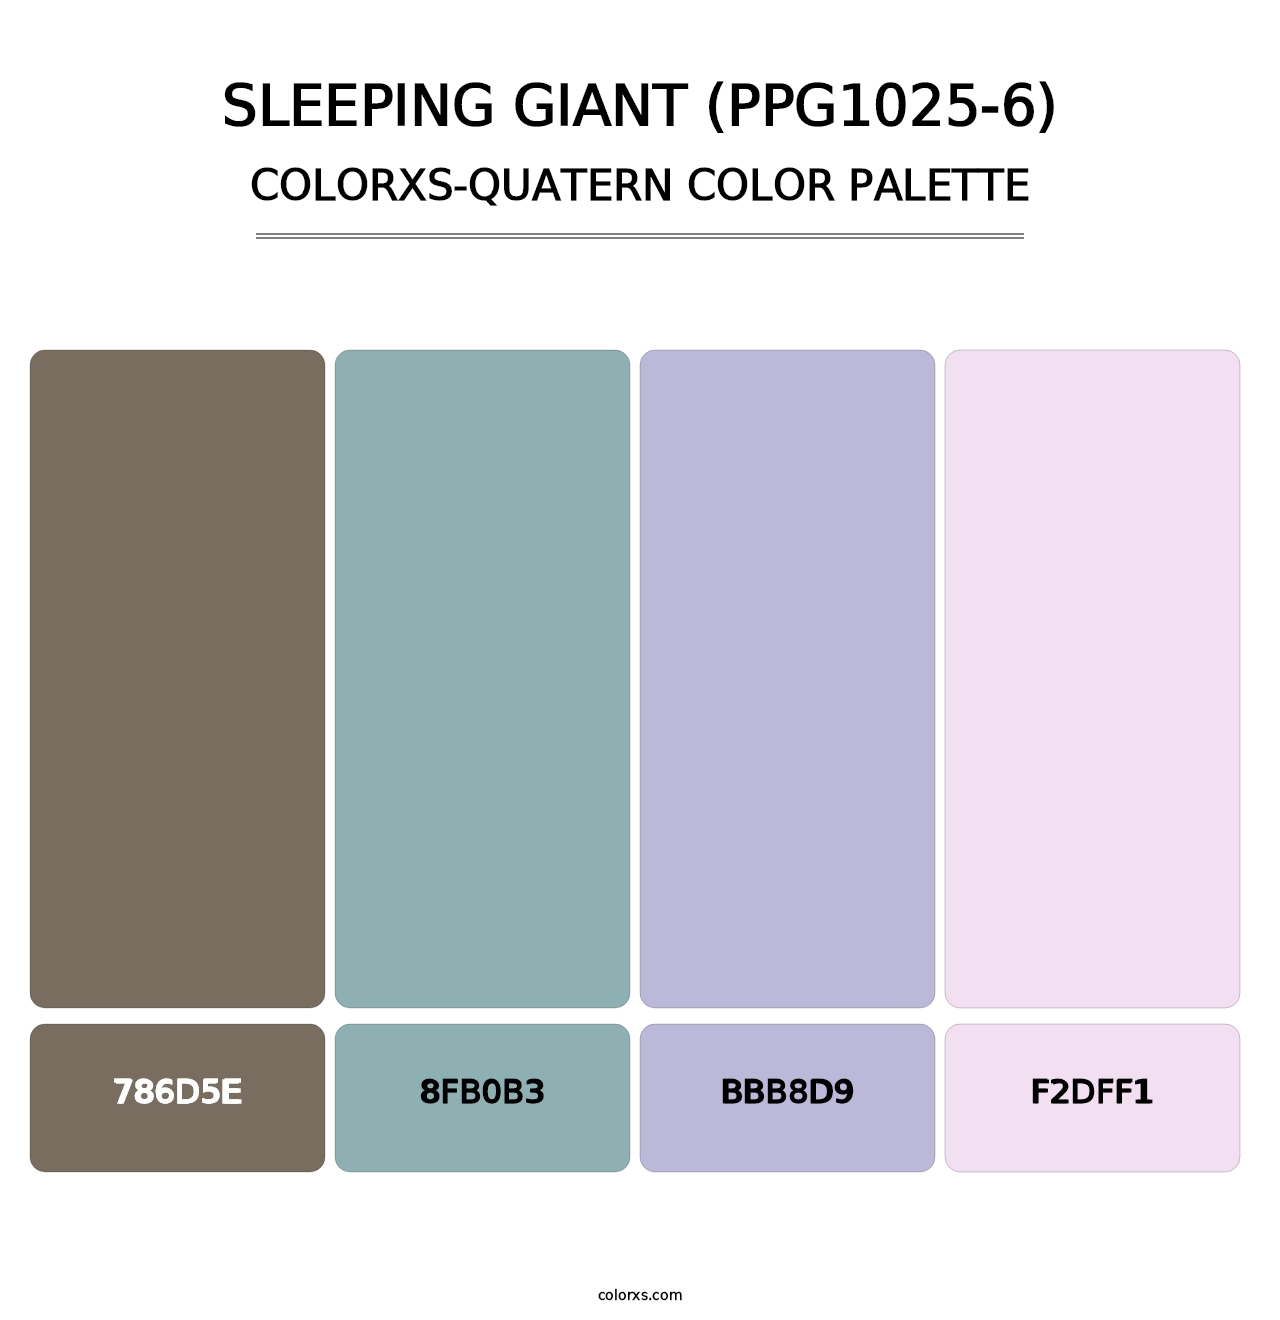 Sleeping Giant (PPG1025-6) - Colorxs Quatern Palette